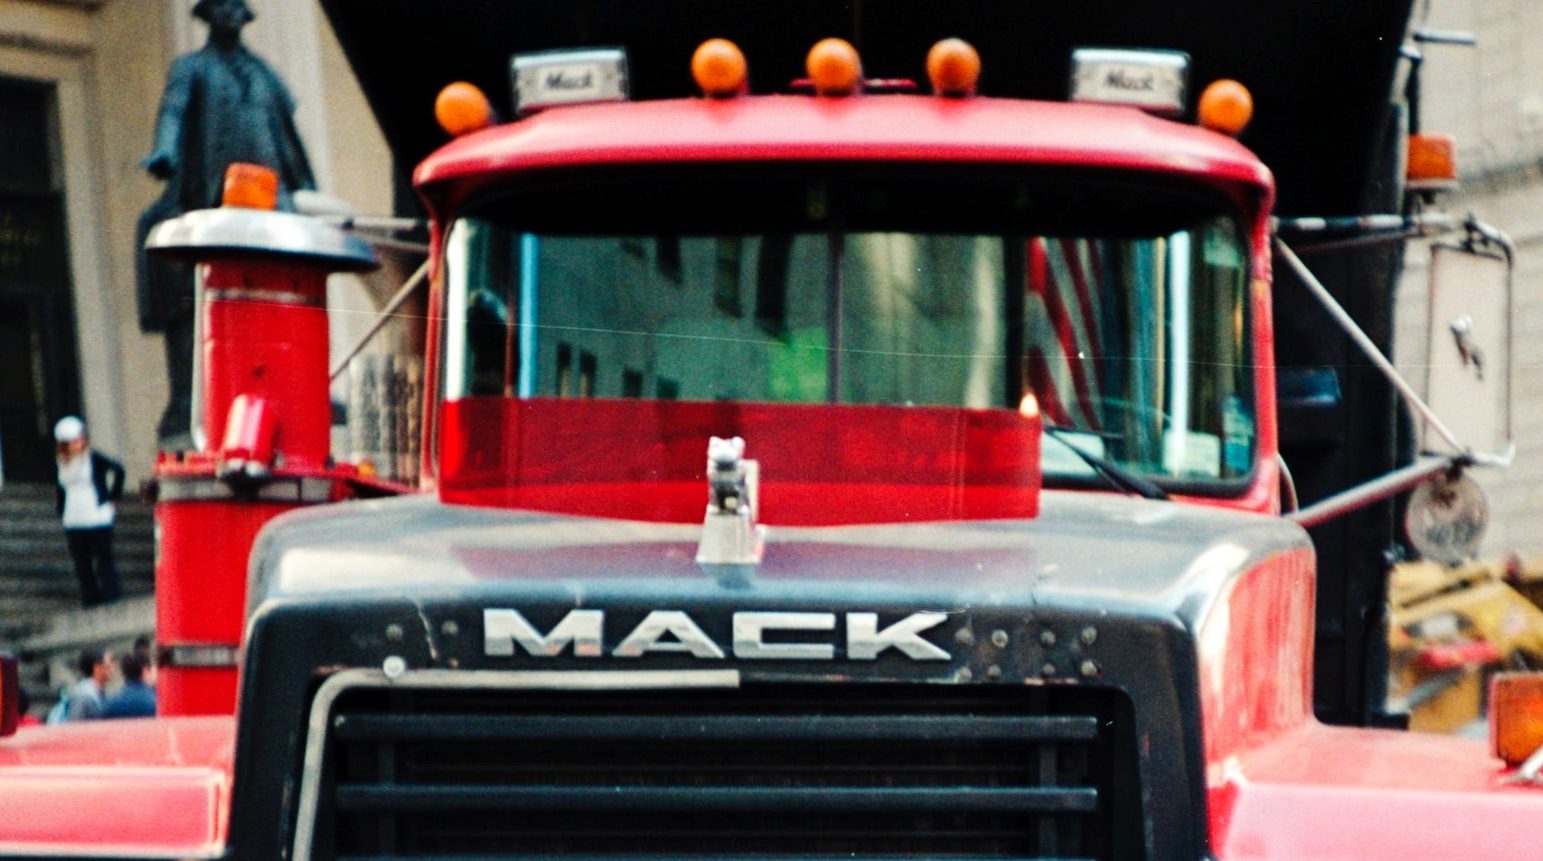 Mack has Launched a New Maintenance Program for Customers